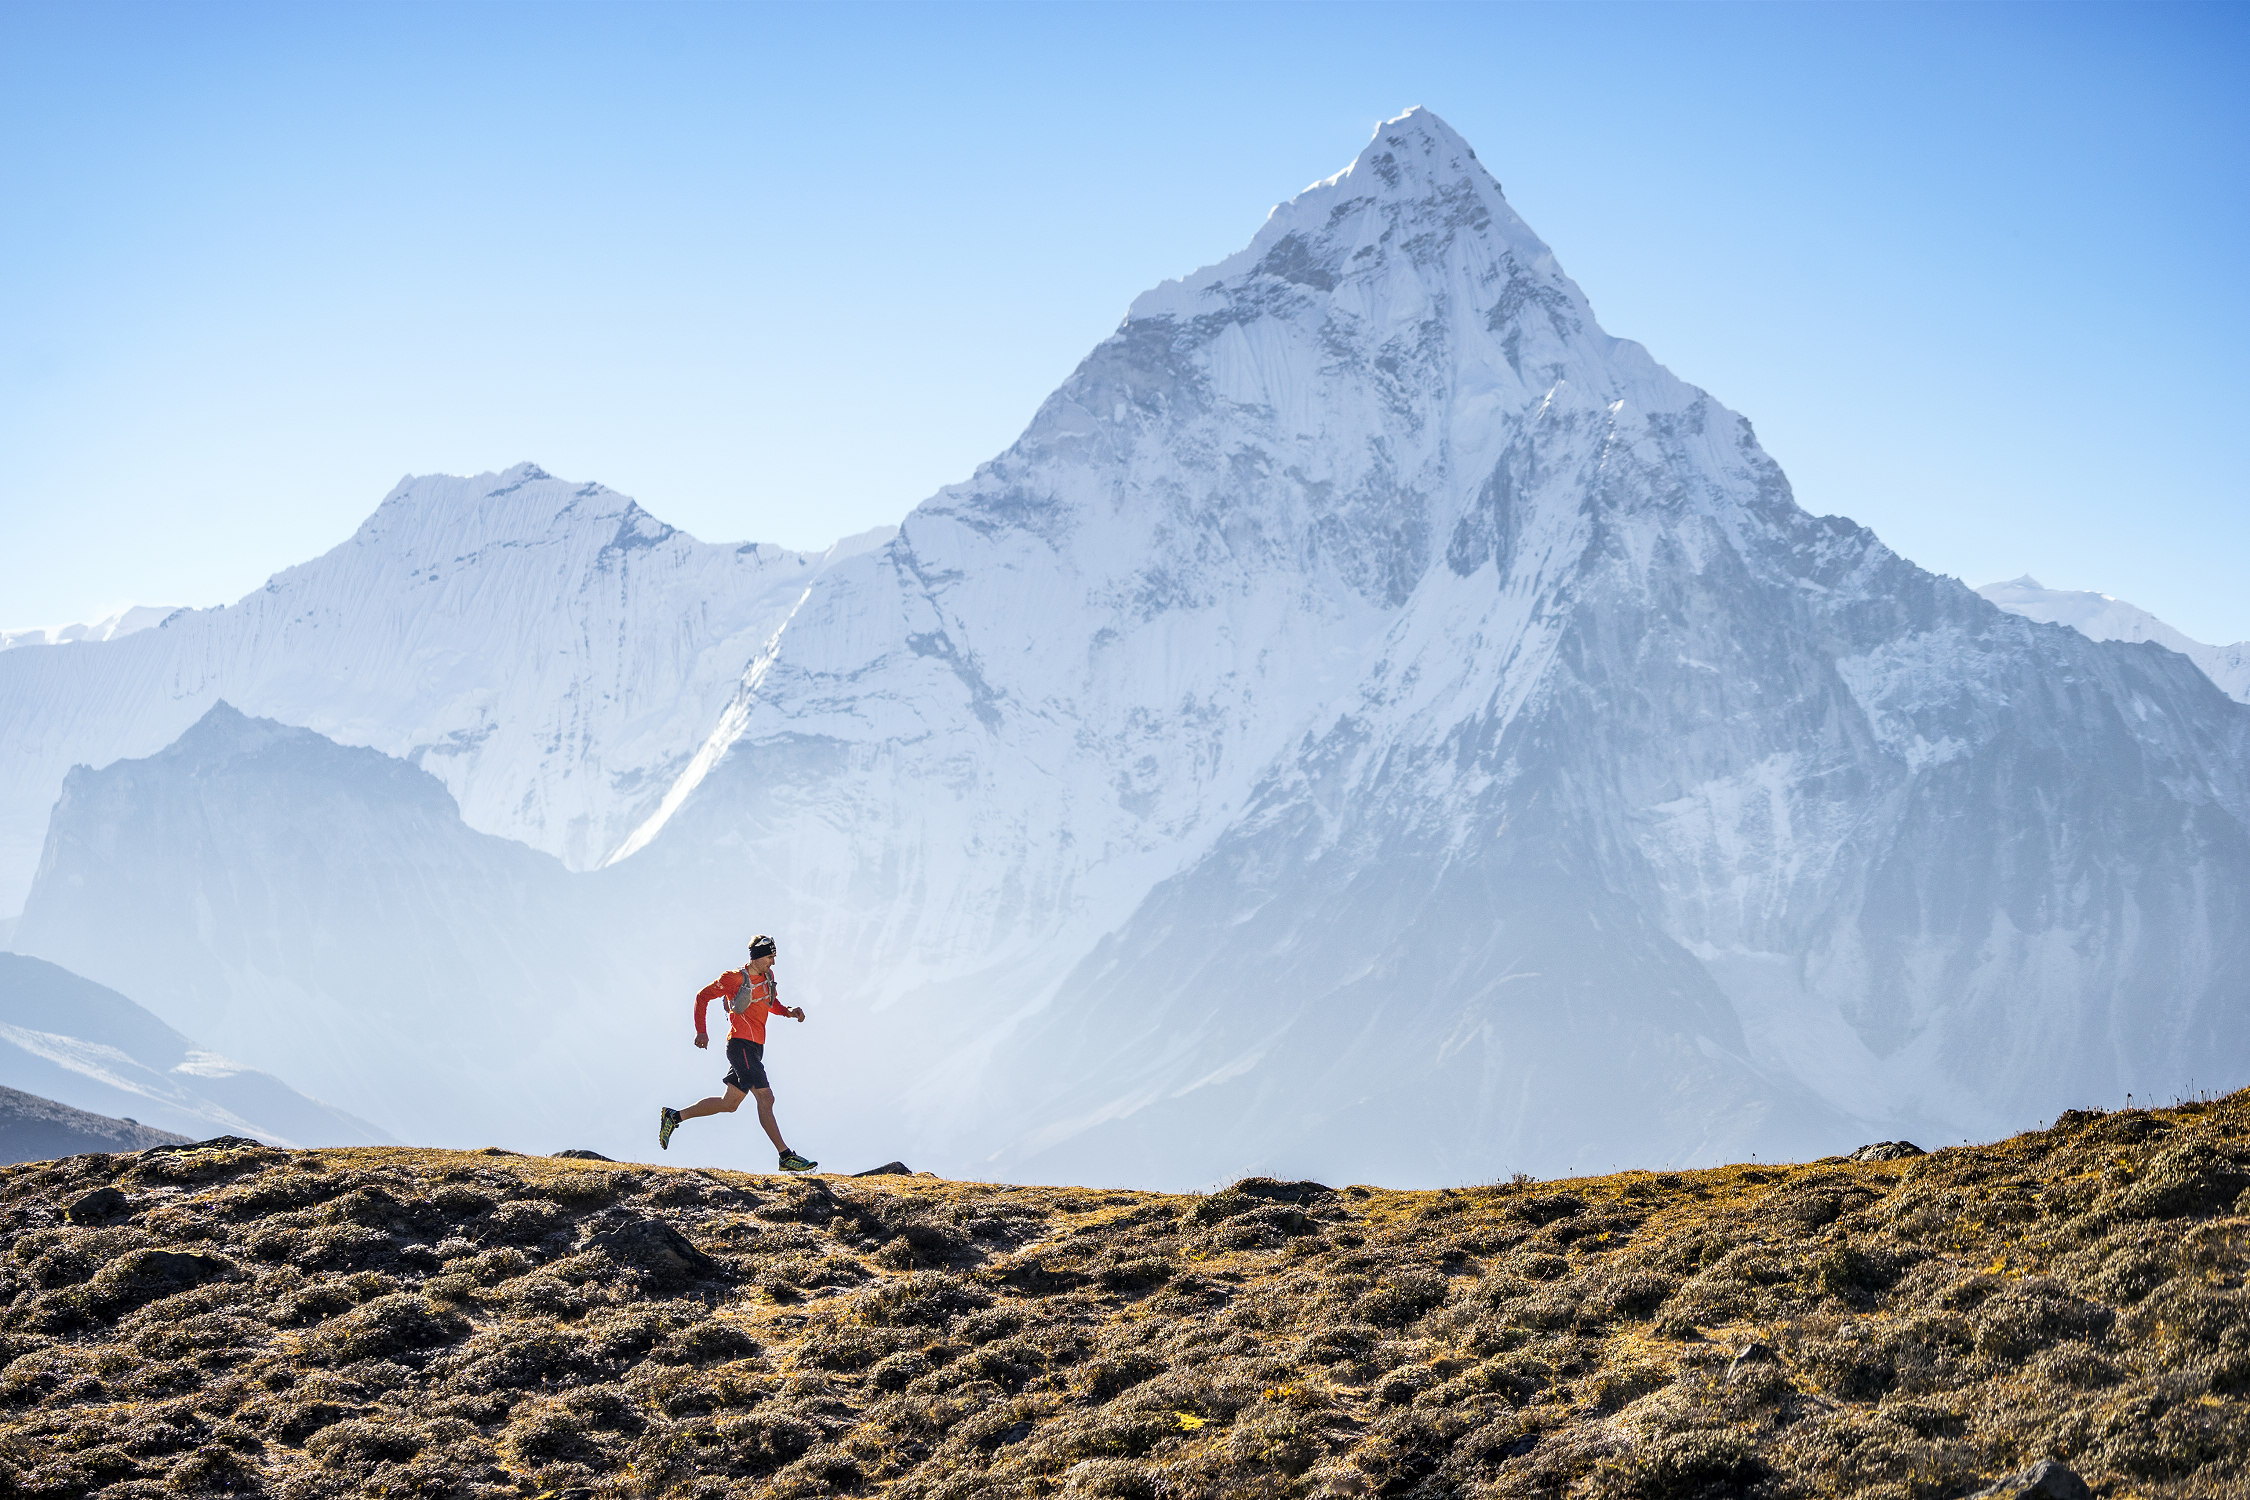 Ueli Steck trail running in the Khumbu Valley of the Nepal Himalaya, with Ama Dablam in the background, during his acclimating process for a climbing expedition. Ueli stayed in Dzonghla where he would run trails, run Lobuche Peak, and climb Cholatse before his primary objective, Nuptse.